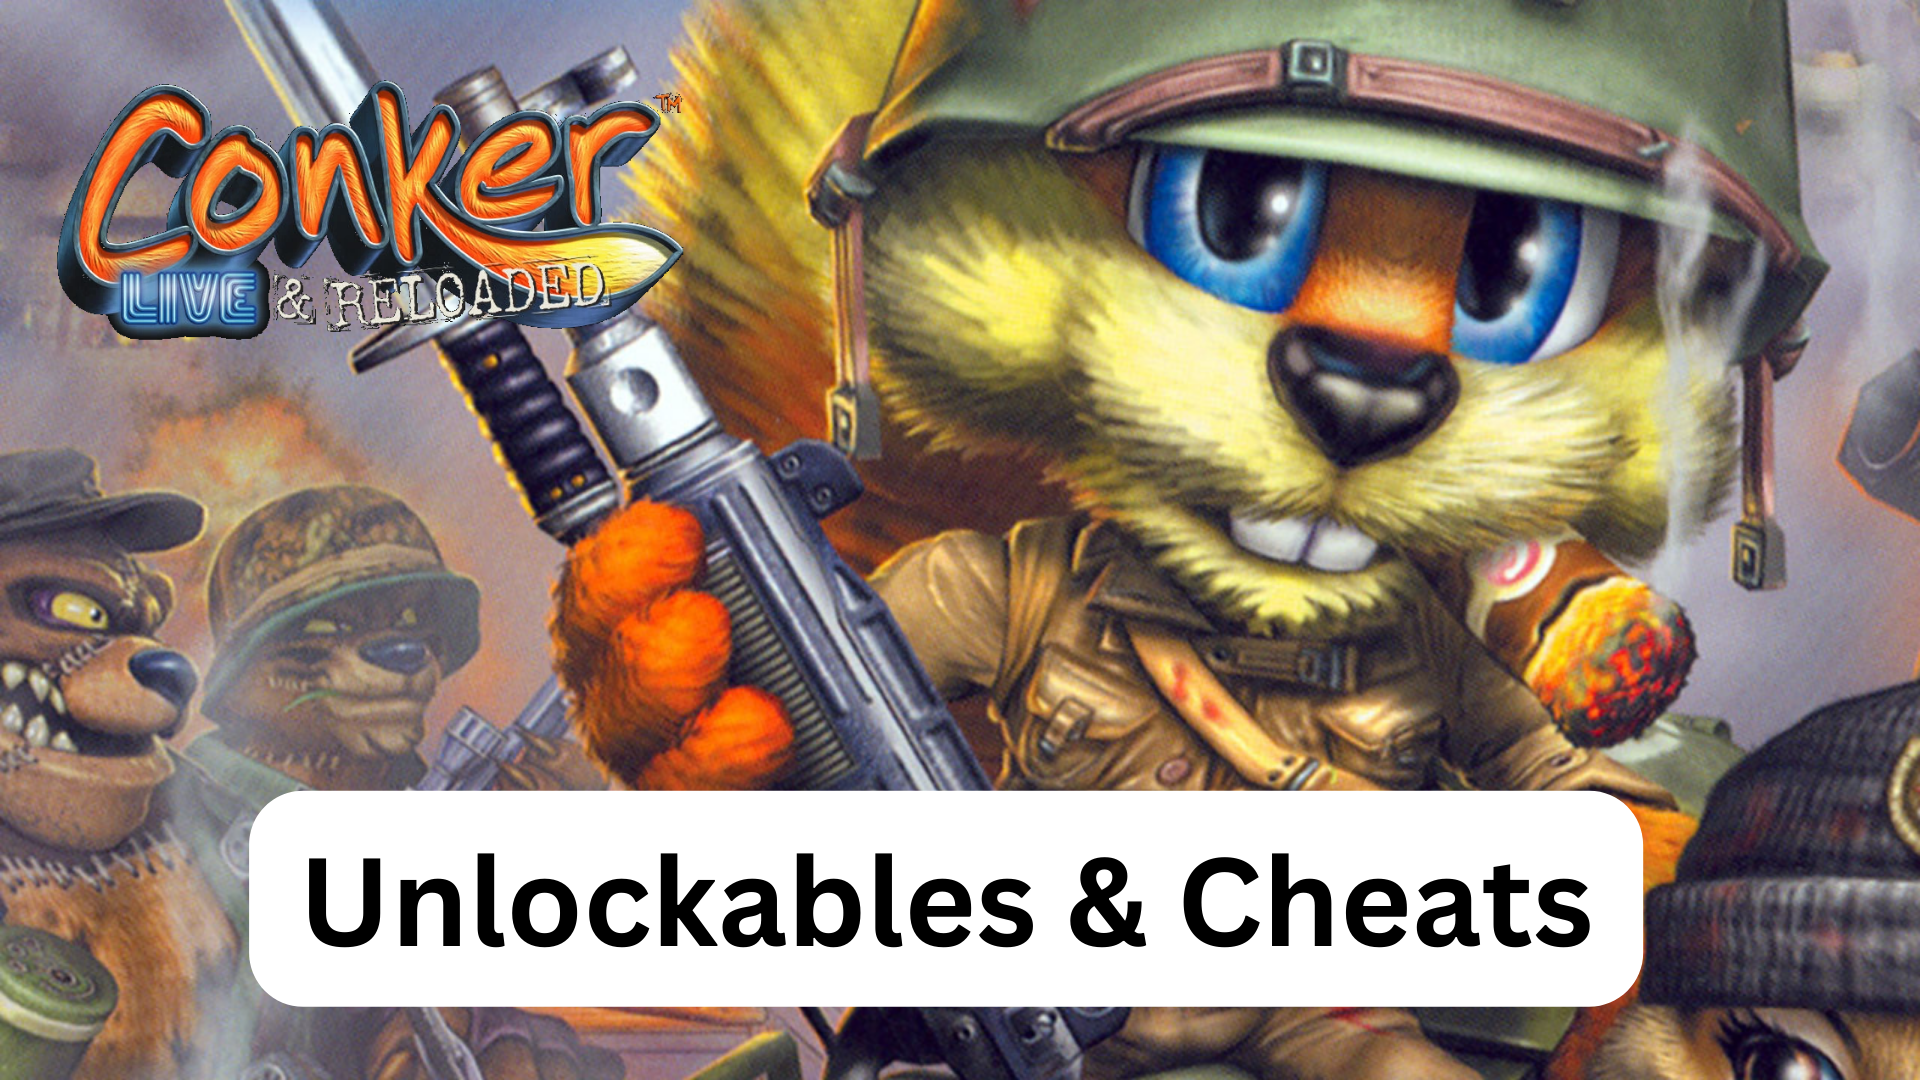 conker live and reloaded unlockables & cheats